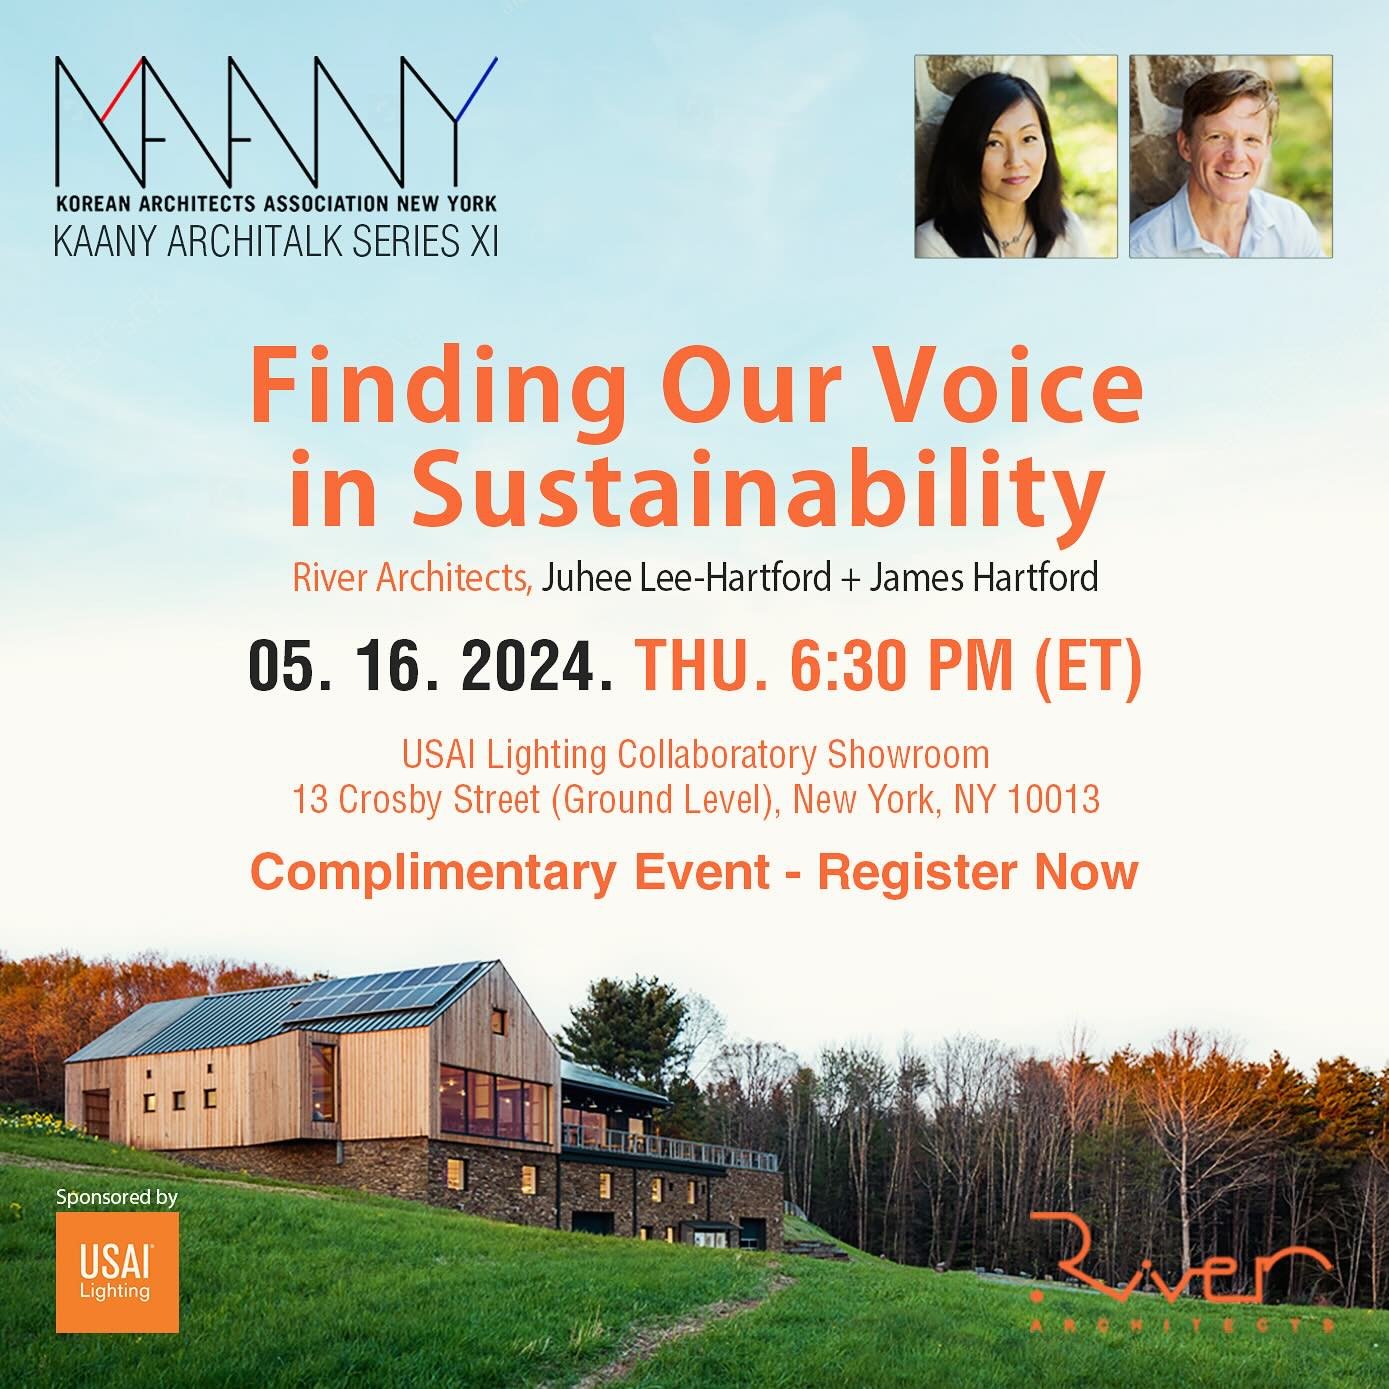 KAANY 아키톡 시리즈 XI by River Architects
&bull; 주제: Finding Our Voice In Sustainability by
&bull; 시간: 5/16 Thursday 6:30 PM (ET)
&bull; 장소: USAI Lighting Collaboratory Showroom
  13 Crosby Street (Ground Level), New York, NY 10013 
&bull; 등록: Click the P